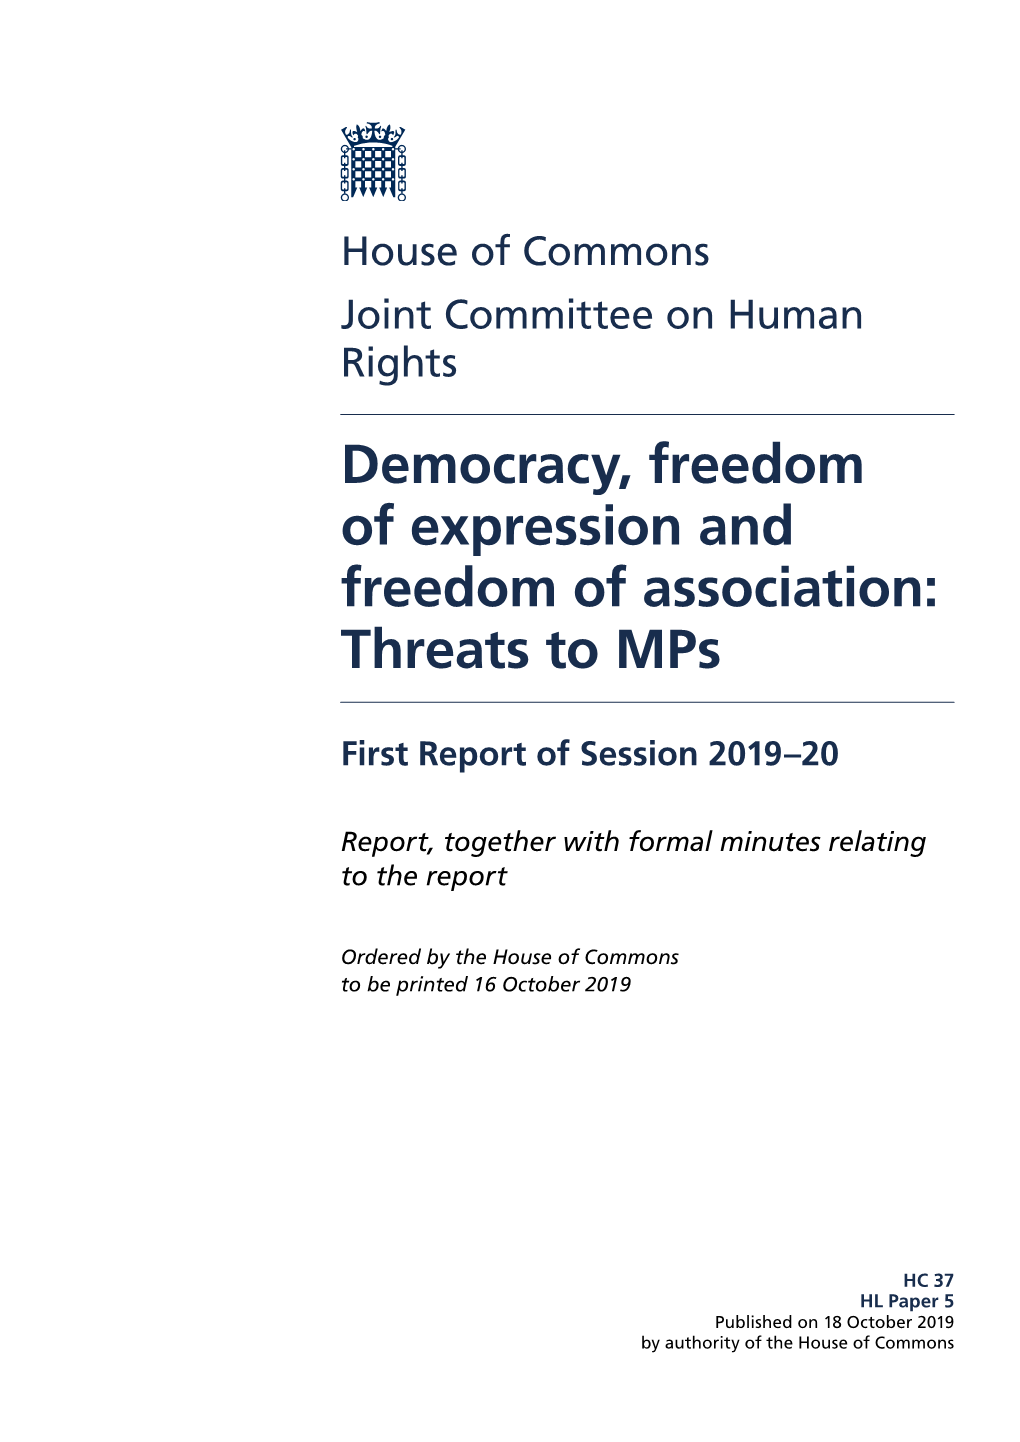 Threats to Mps